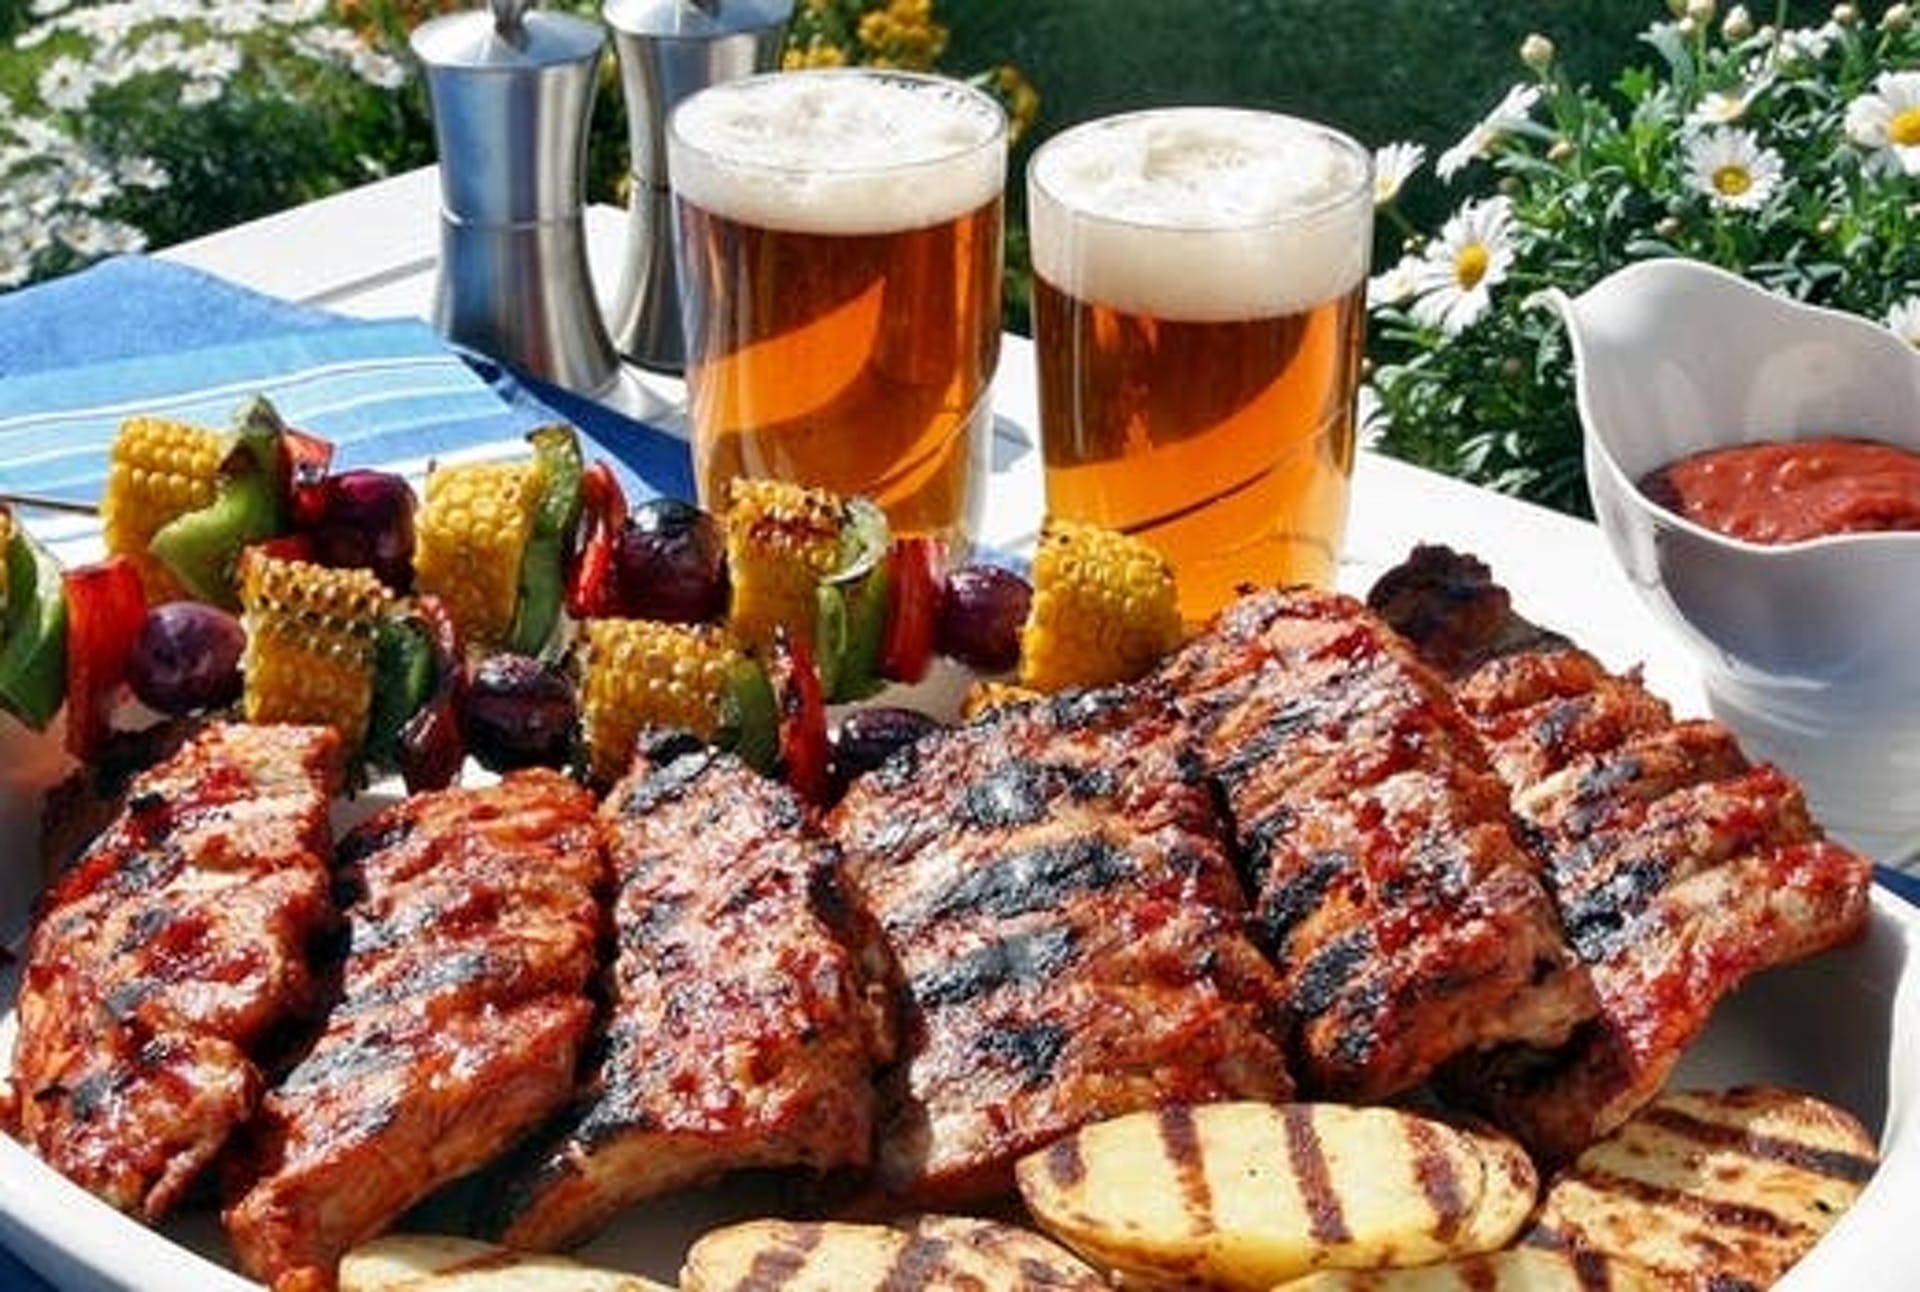 BBQ and beer